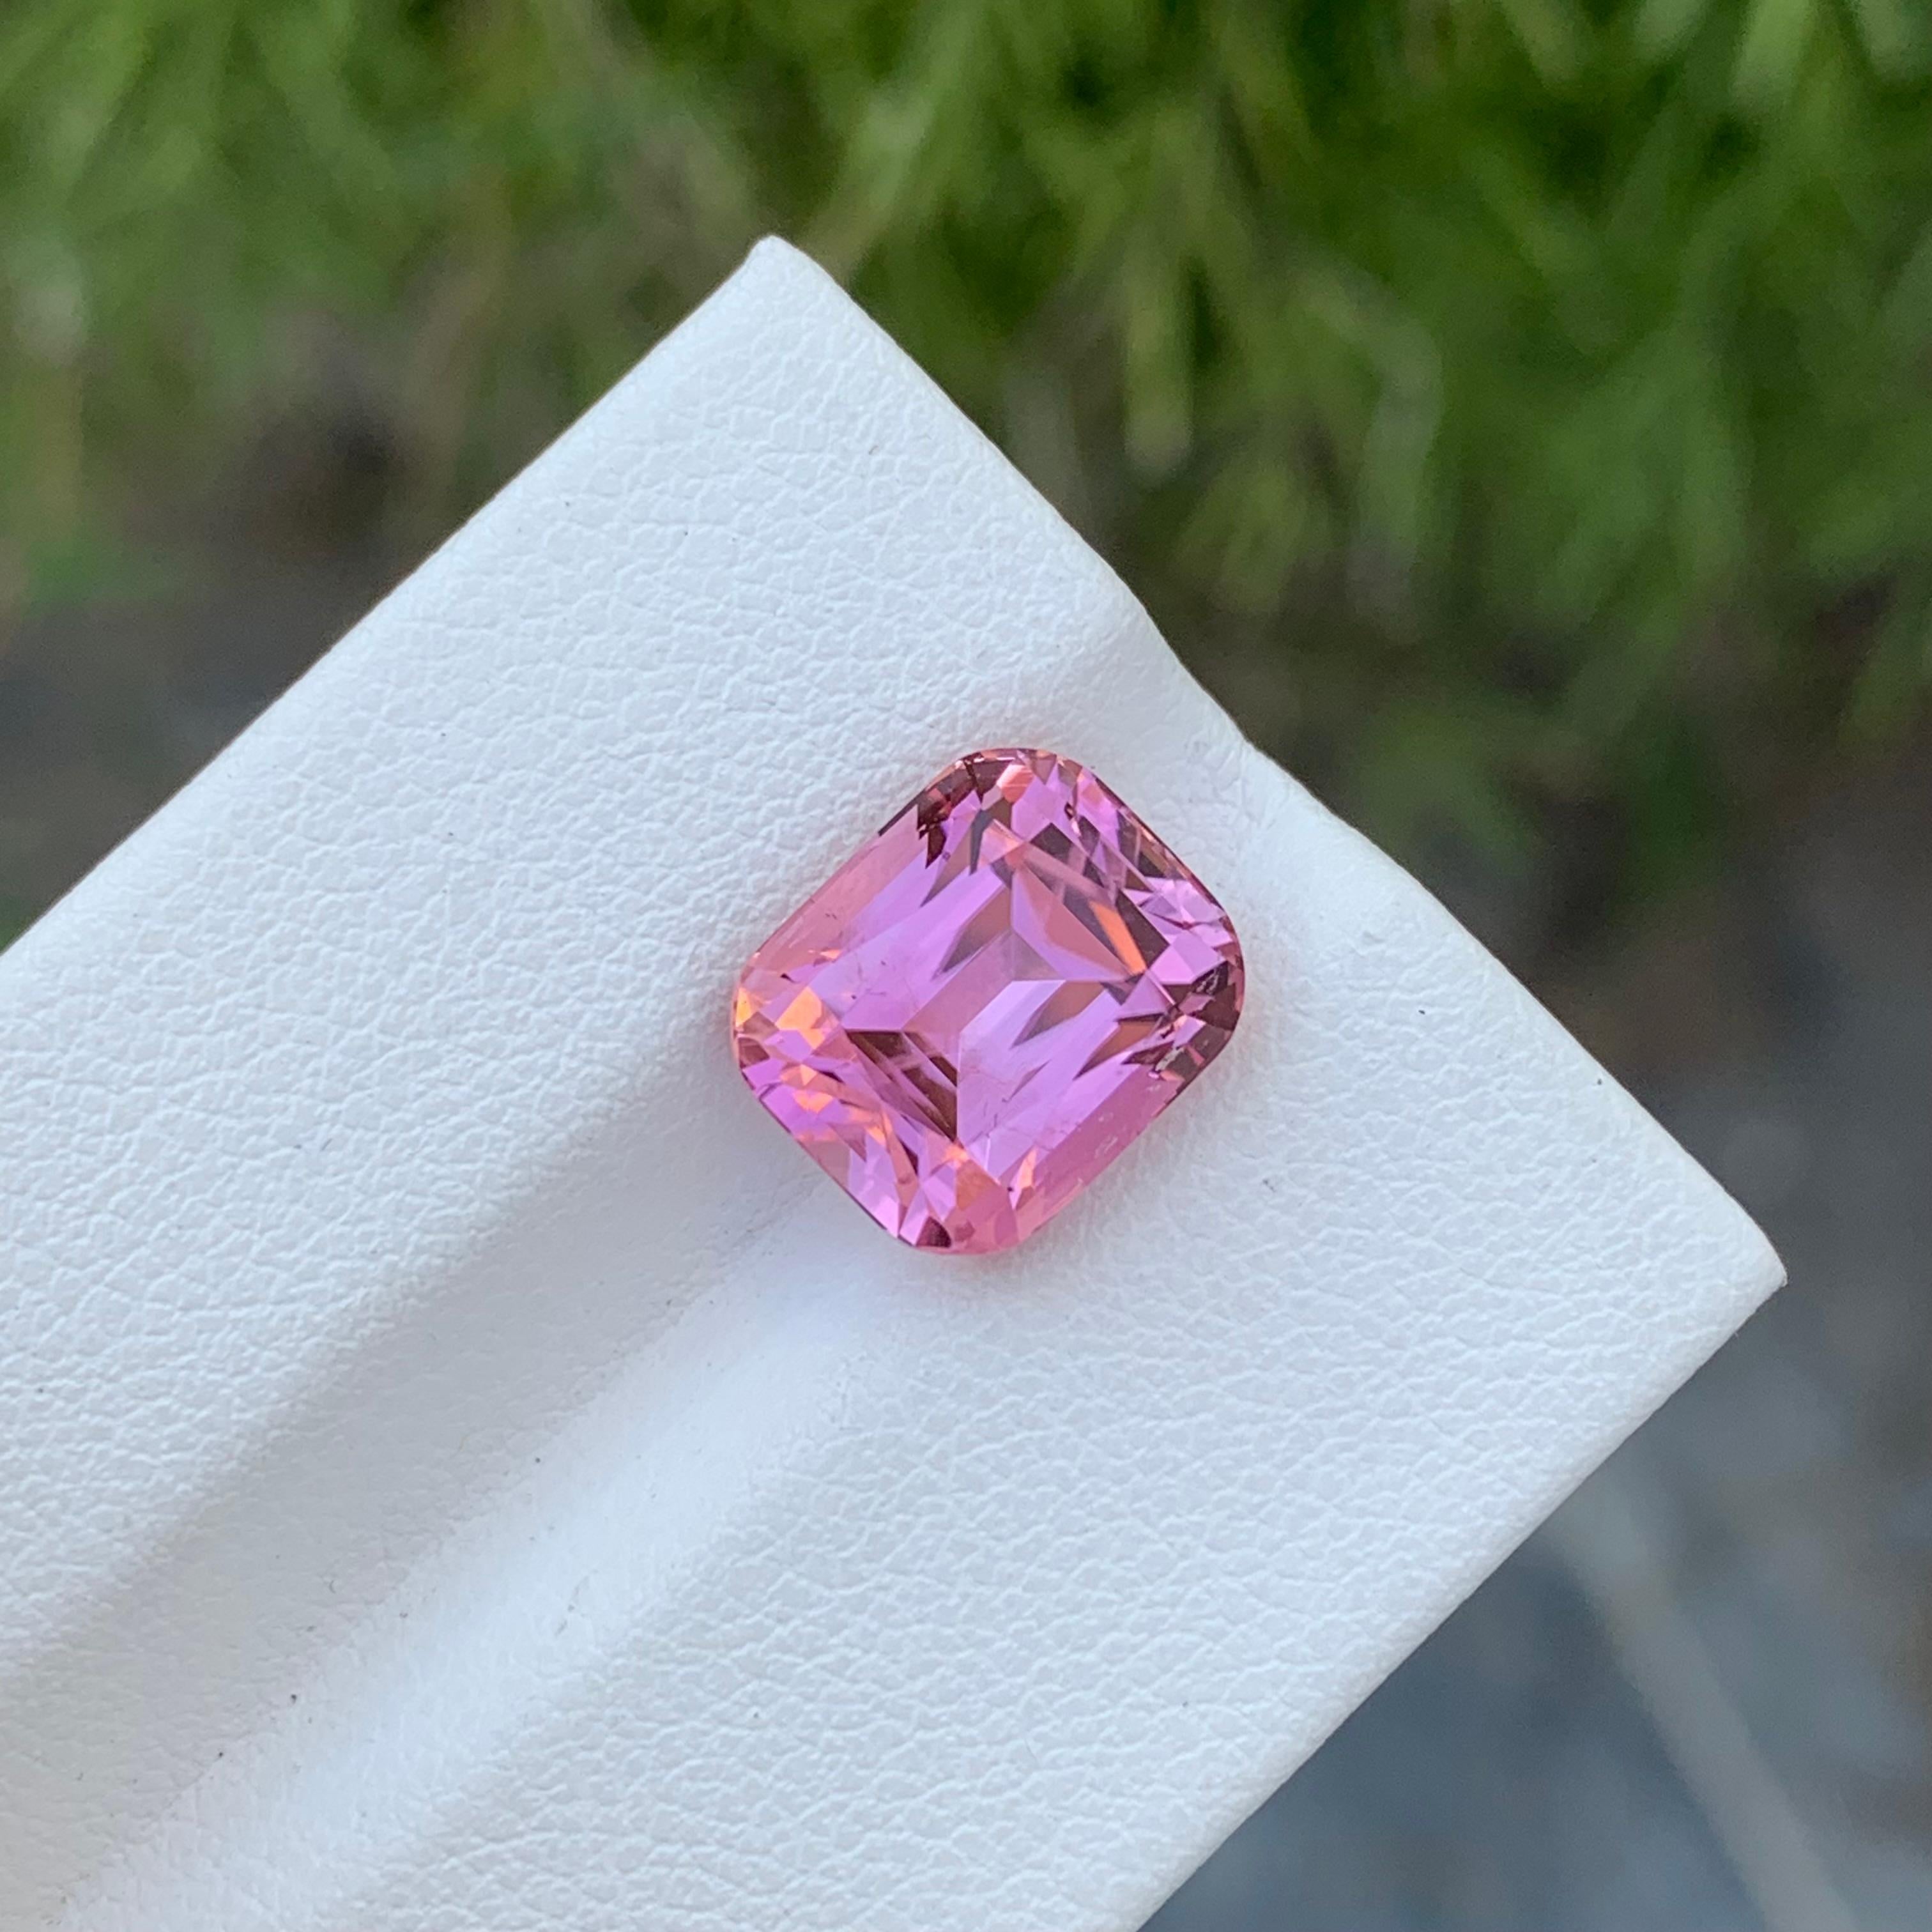 Loose Pink Tourmaline
Weight: 6.00 Carats
Dimension: 10.7 x 9.1 x 7.8 Mm
Colour: Pink
Origin: Afghanistan
Shape : Cushion
Certificate: On Demand
Treatment: Non

Pink tourmaline, known for its captivating hue ranging from delicate pastel shades to